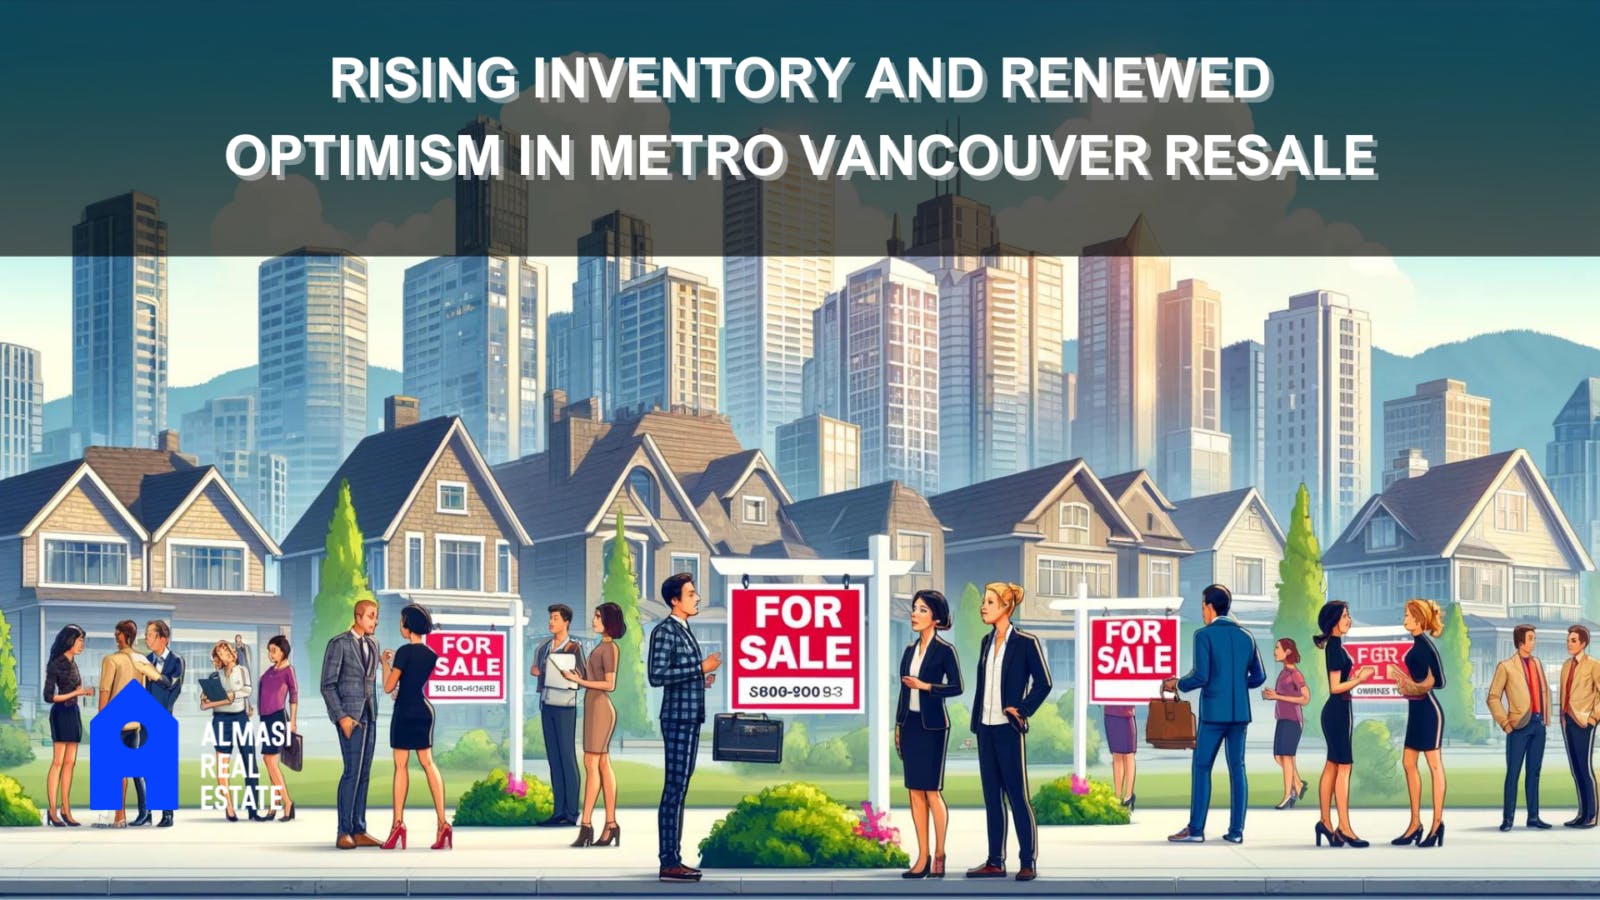 RISING INVENTORY AND RENEWED OPTIMISM IN METRO VANCOUVER RESALE